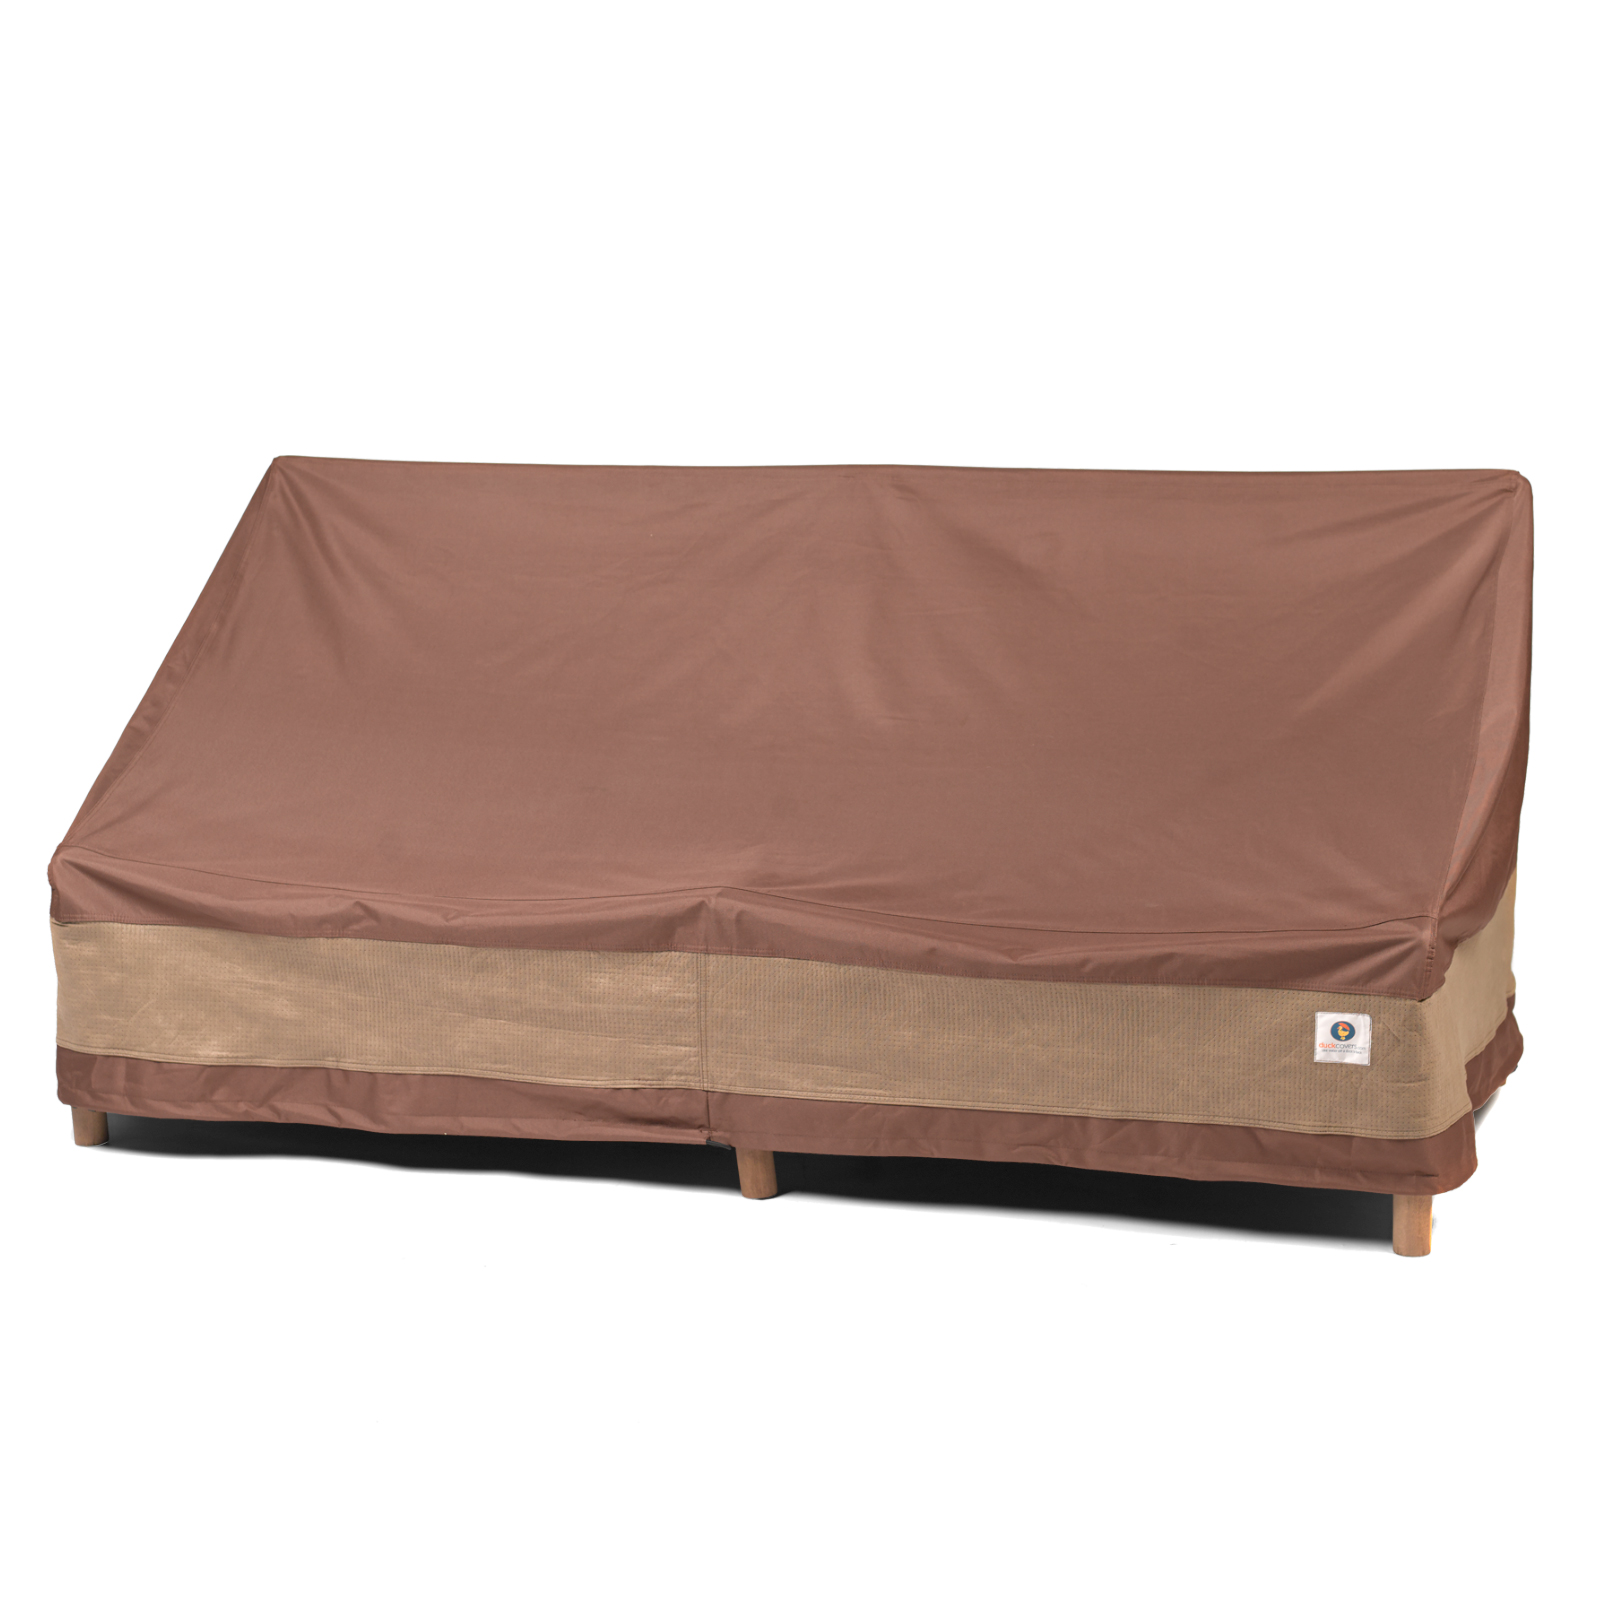 Duck Covers-USO793735-Sofa Covers Ultimate (Extreme Duty)  79W x 37D x 35H